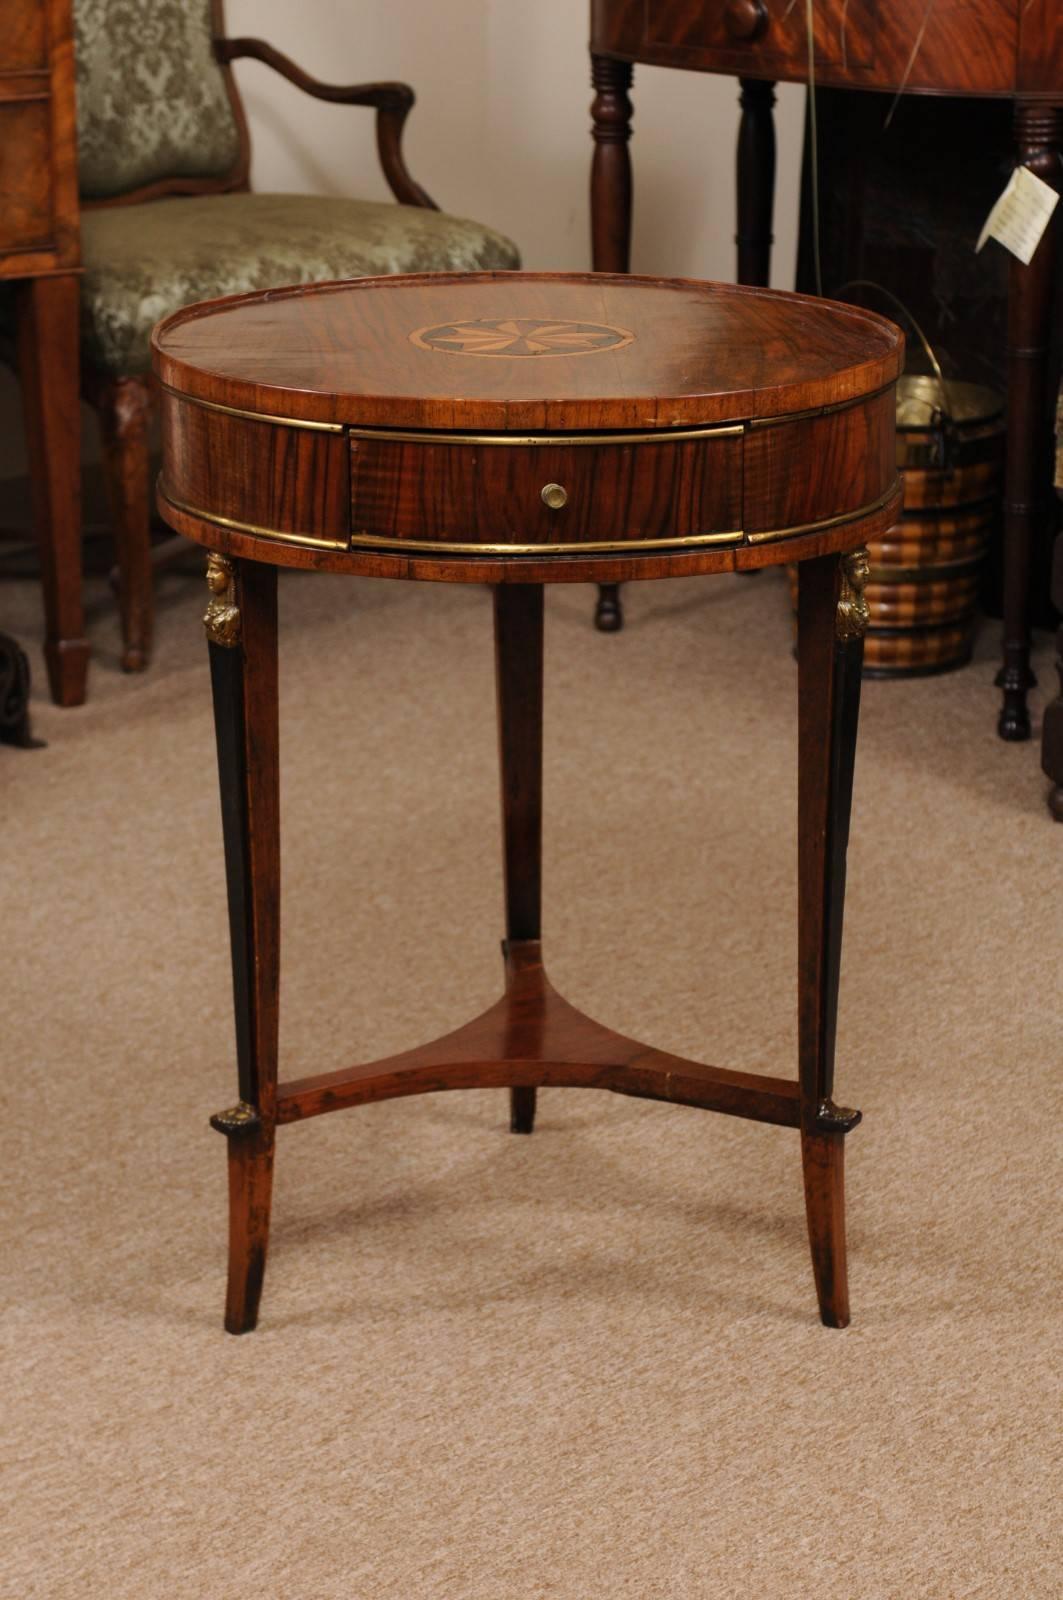 The early 19th century Italian figured walnut gueridon/round side table with parquetry center medallion, brass banding around apron and ebonized legs with mounts and stretcher. 

 